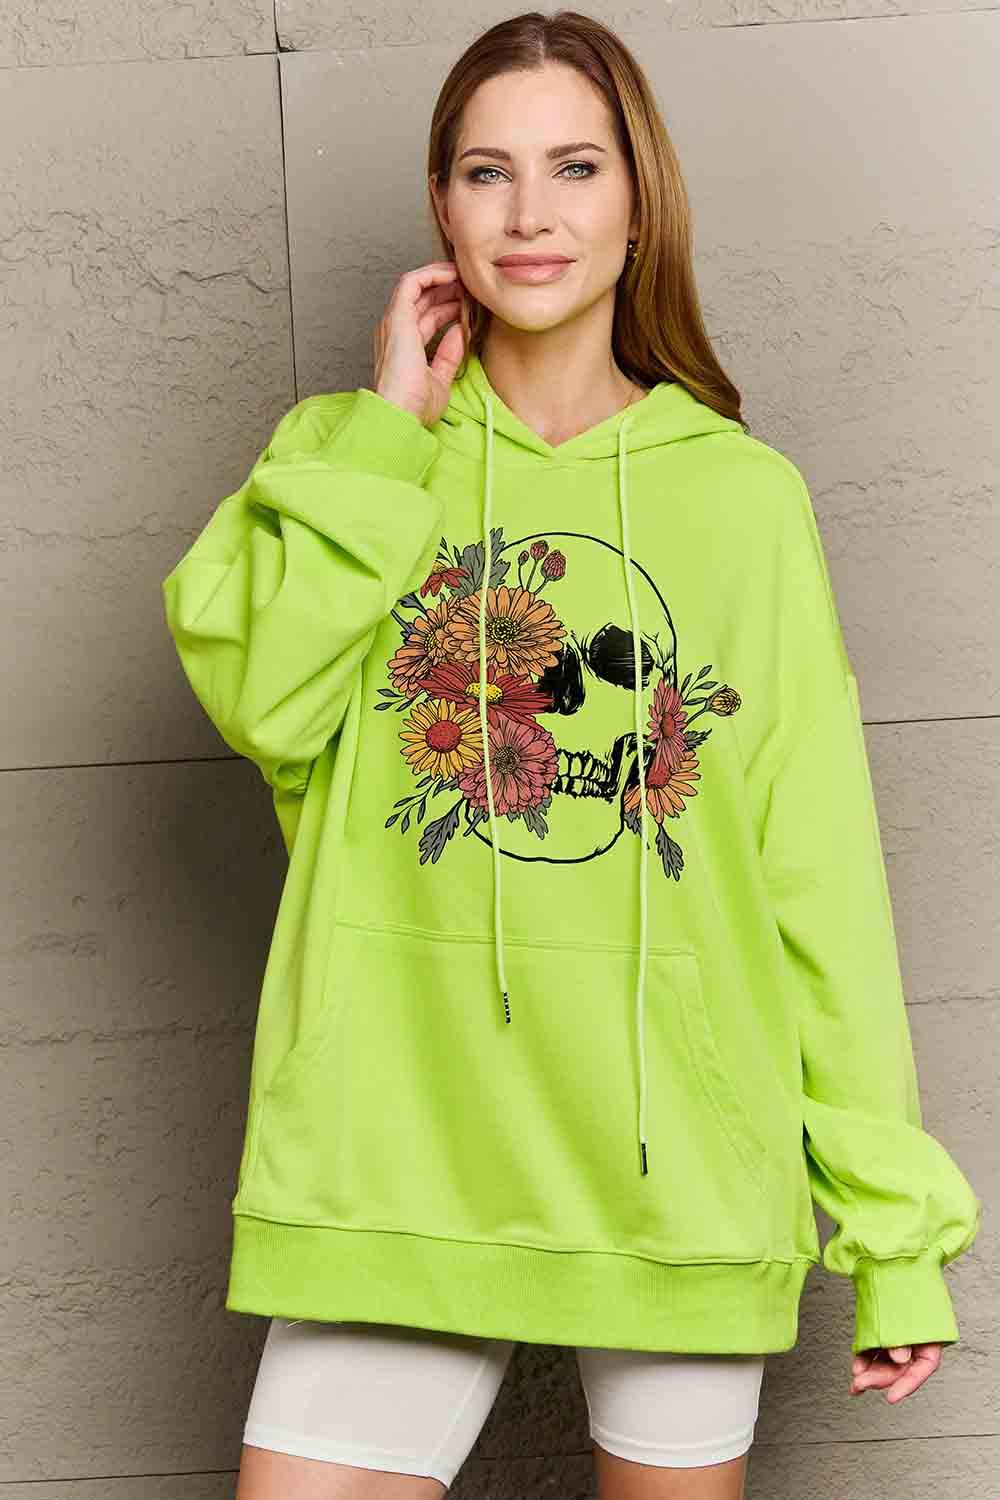 Simply Love Simply Love Full Size Floral Skull Graphic Hoodie - Lab Fashion, Home & Health